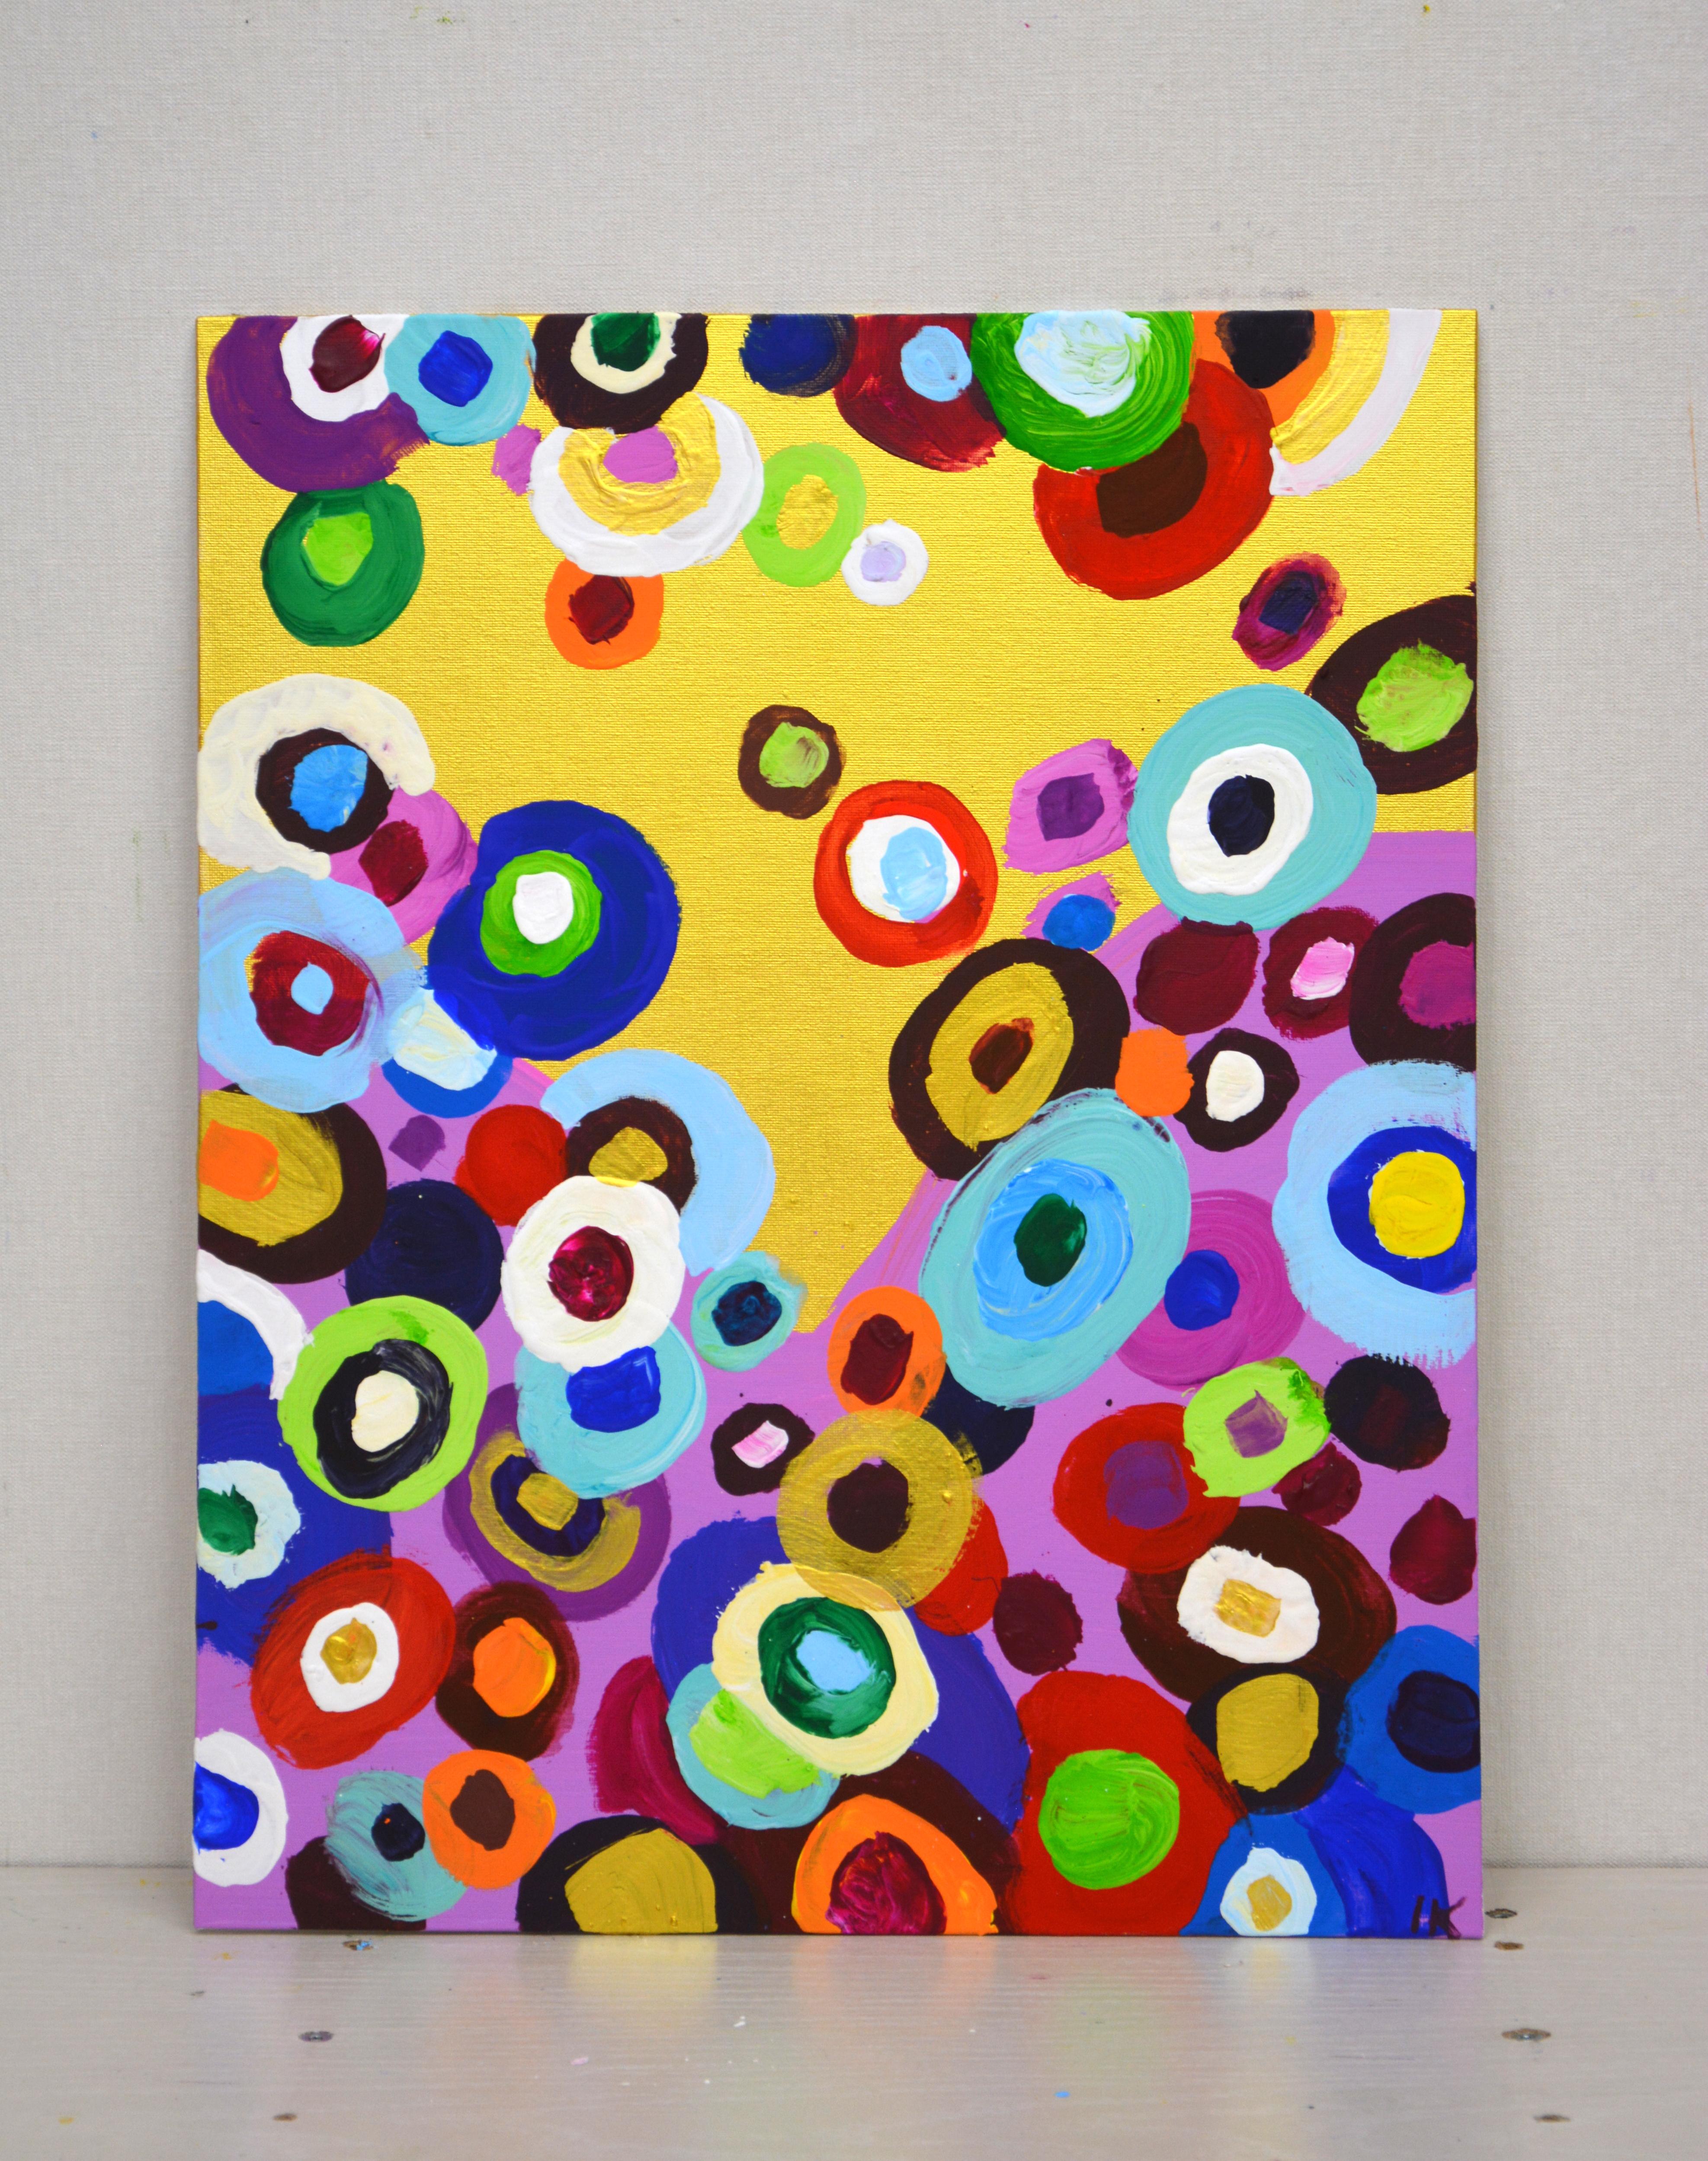 Circles on gold 2. - Painting by Iryna Kastsova